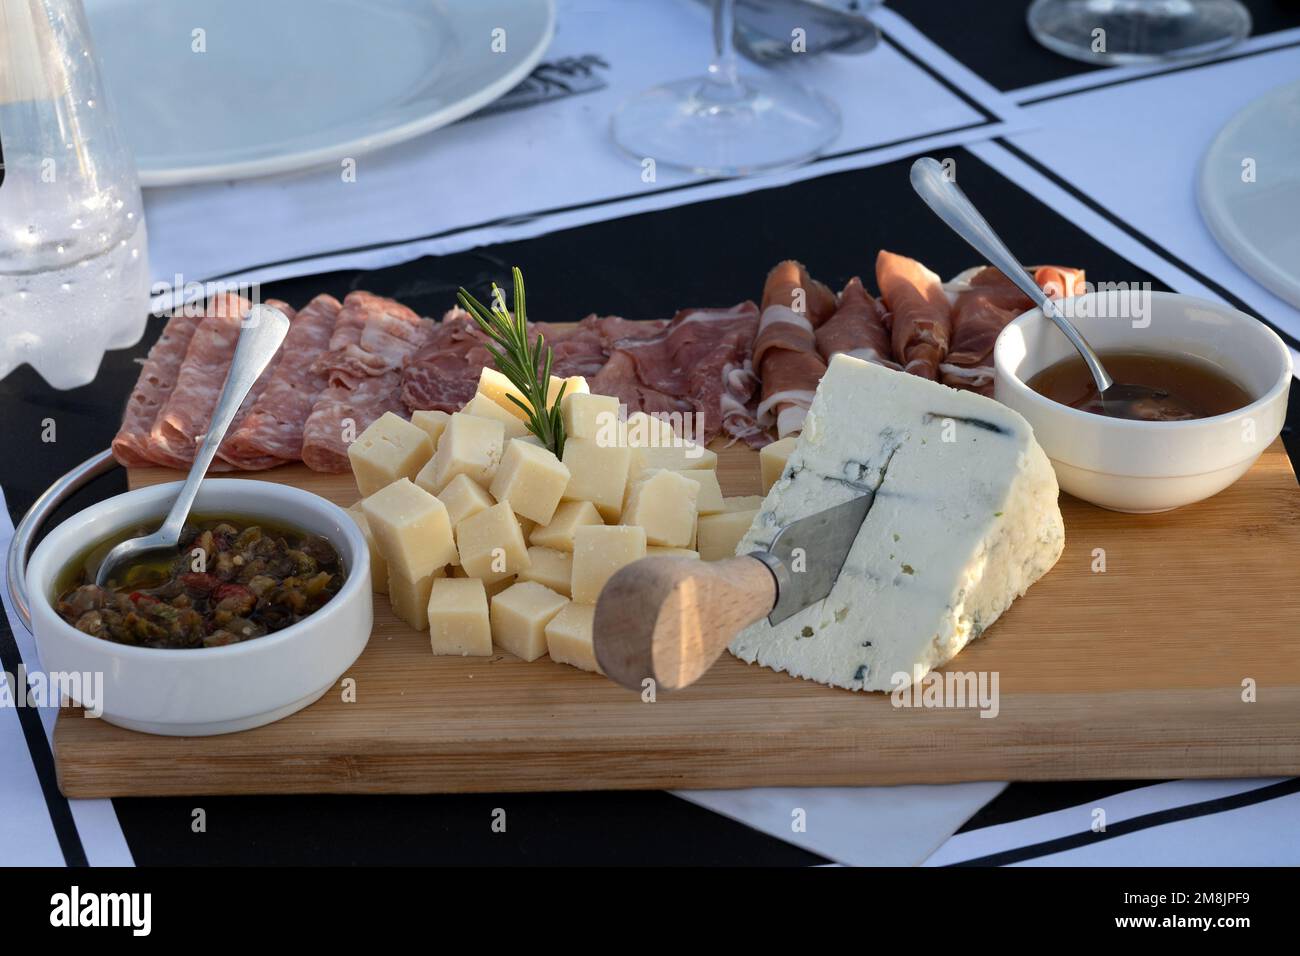 Assortment of cheese and processed meats on a wooden plate in a restaurant setting outdoors illuminated with natural light, realistic composition in a Stock Photo